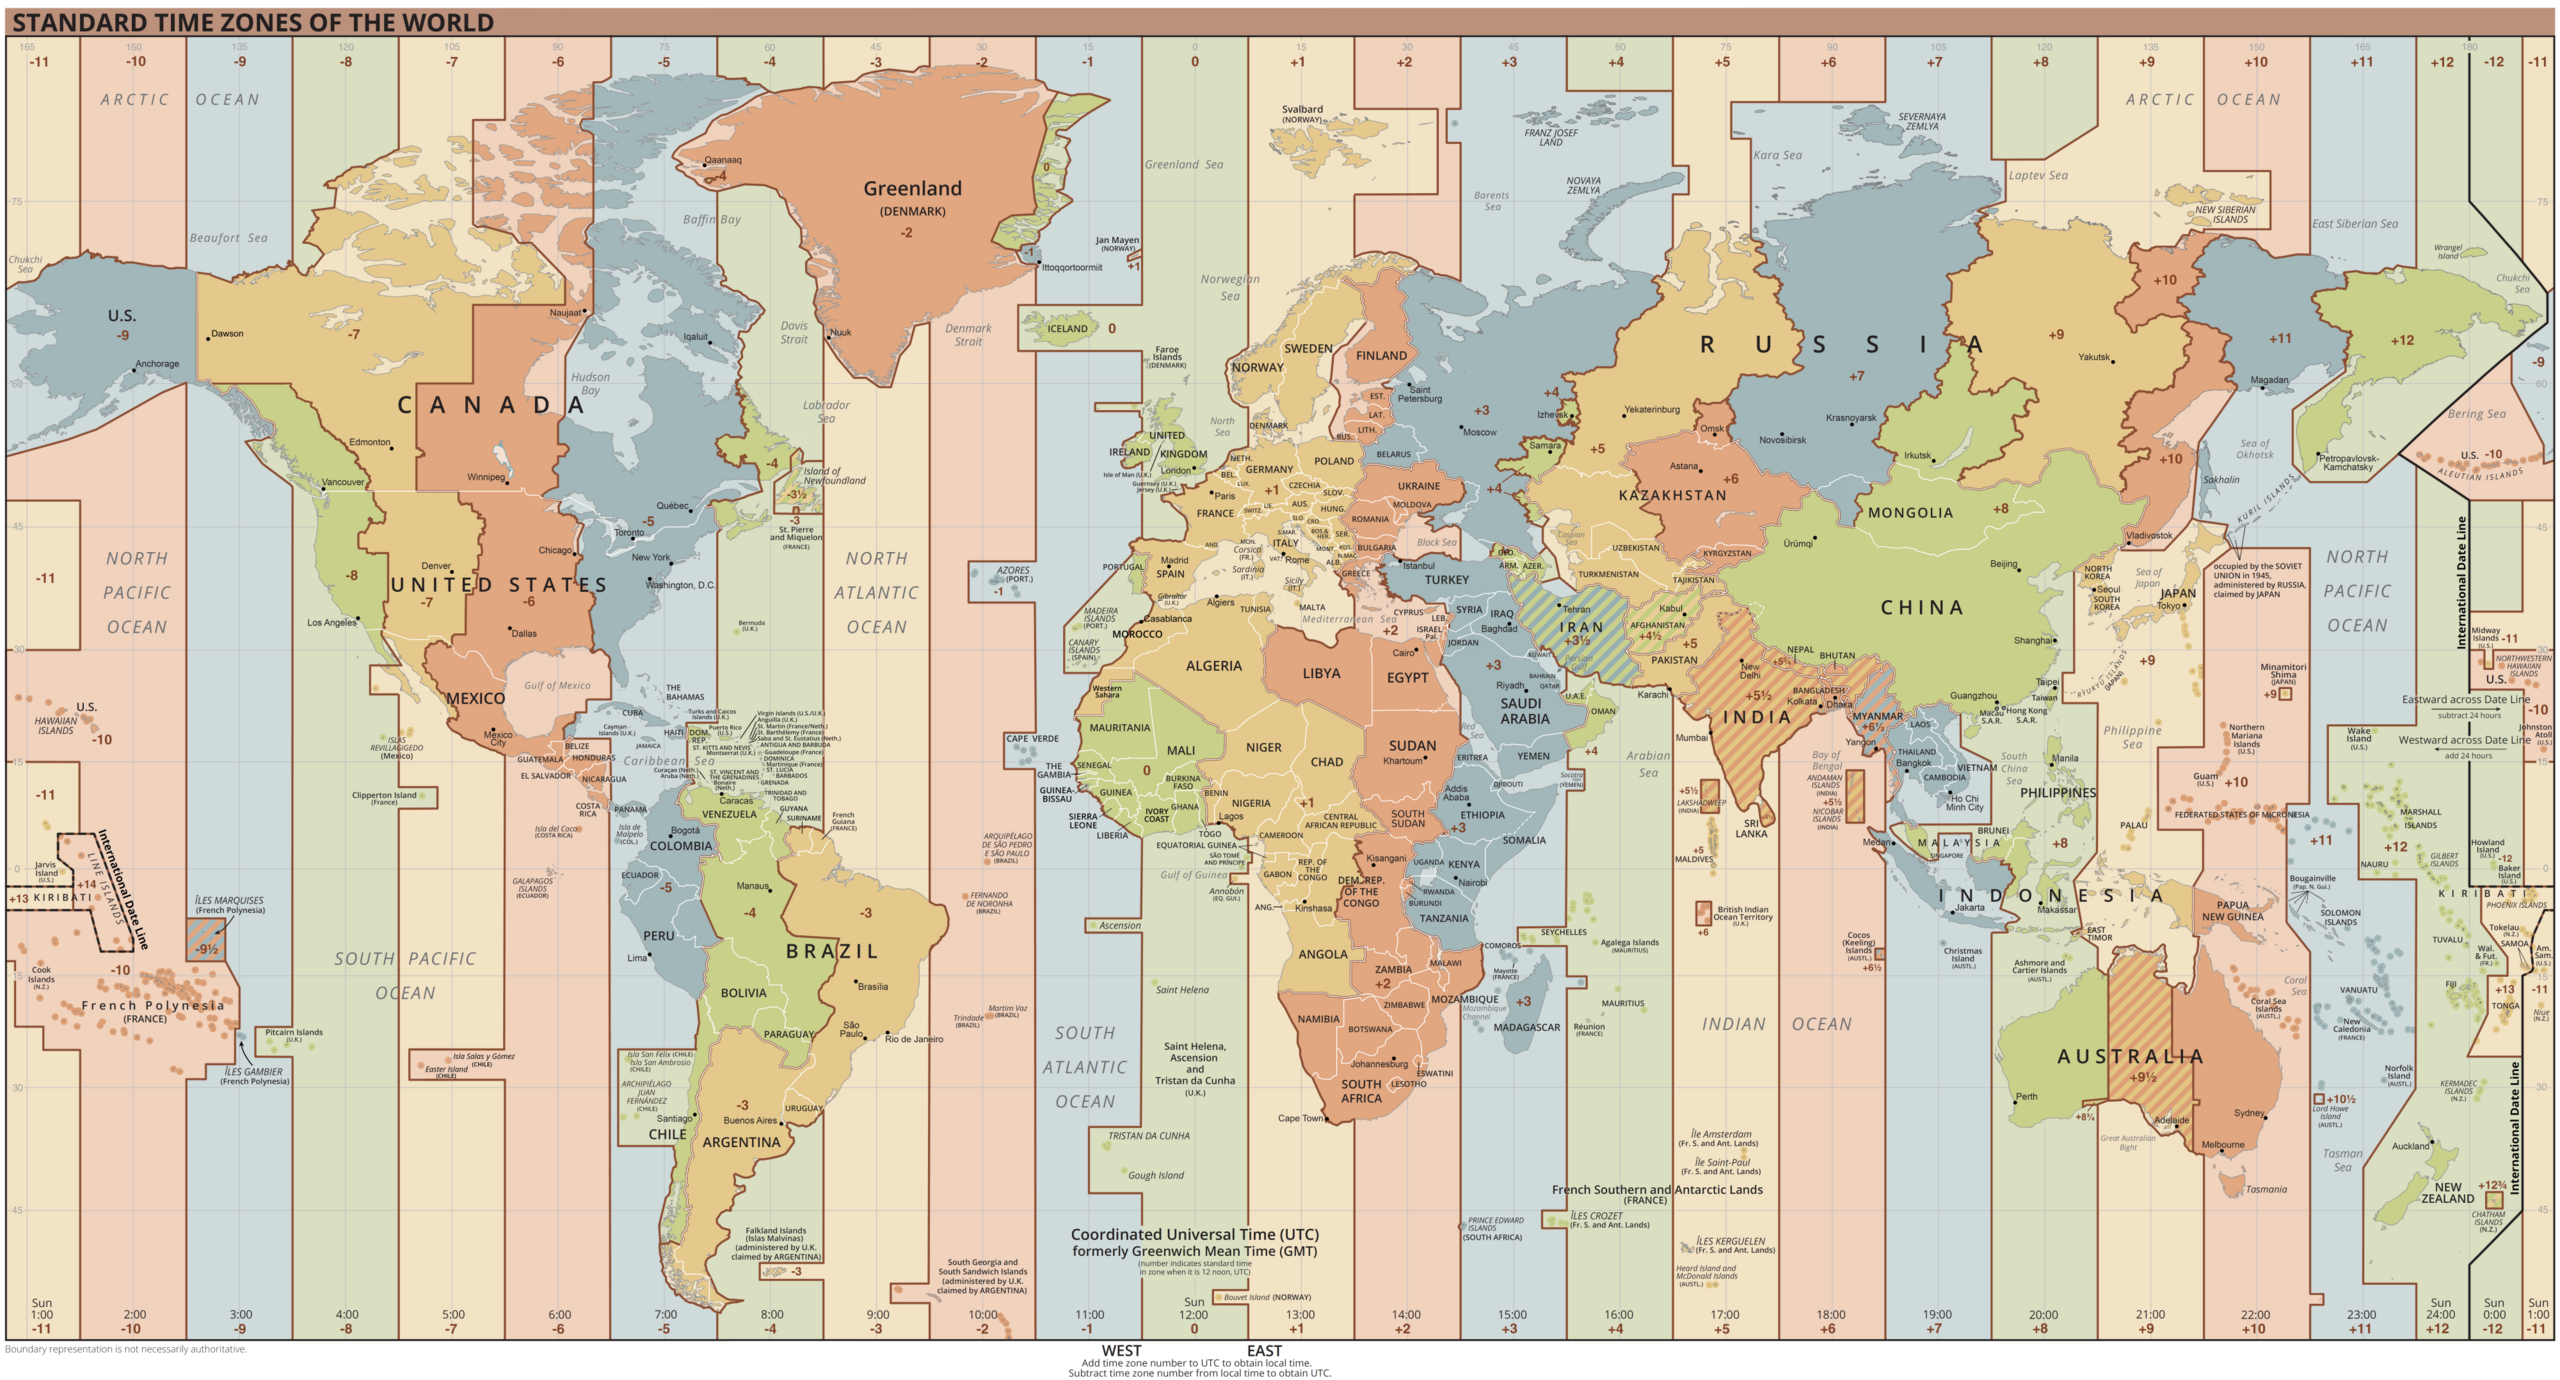 A map of the world with different time zones and the location of Santa Claus.